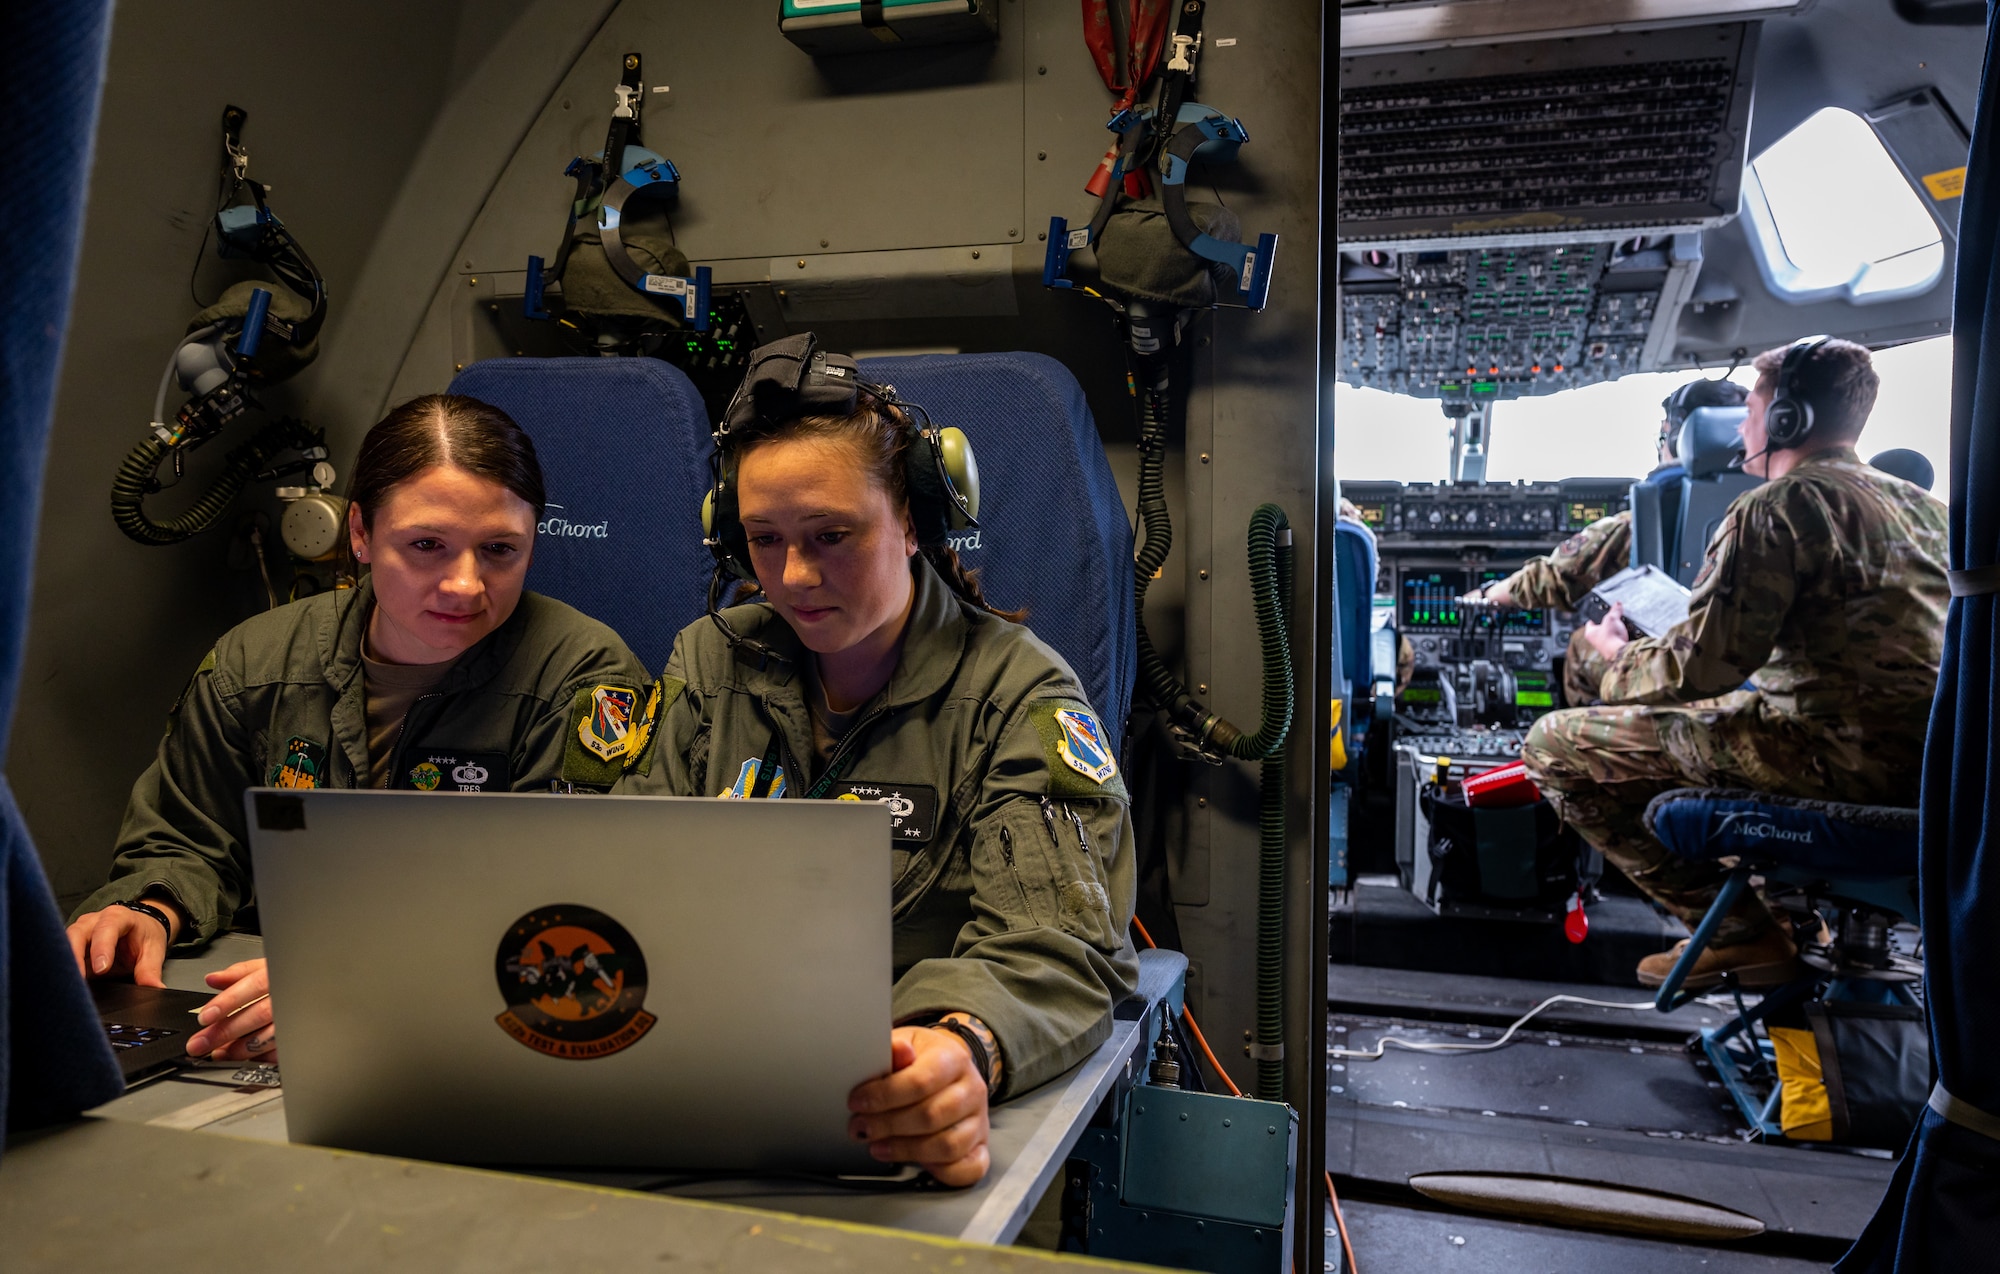 U.S. Air Force Staff Sgt. Hannah Fisk, left and Tech. Sgt. Megan Wolfe, Weapons Directors with the 422nd Test and Evaluation Squadron, Command and Control (C2) Division, operate inside the cockpit of a C-17 Globemaster III during Black Flag 23-1 at Nellis Air Force Base, Nevada, Feb. 23, 2023. This operation was accomplished by the combined effort between the C2 teams both on the ground and on the C-17 as they shared data real time to facilitate live operations. (U.S. Air Force photo by Airman 1st Class Josey Blades)